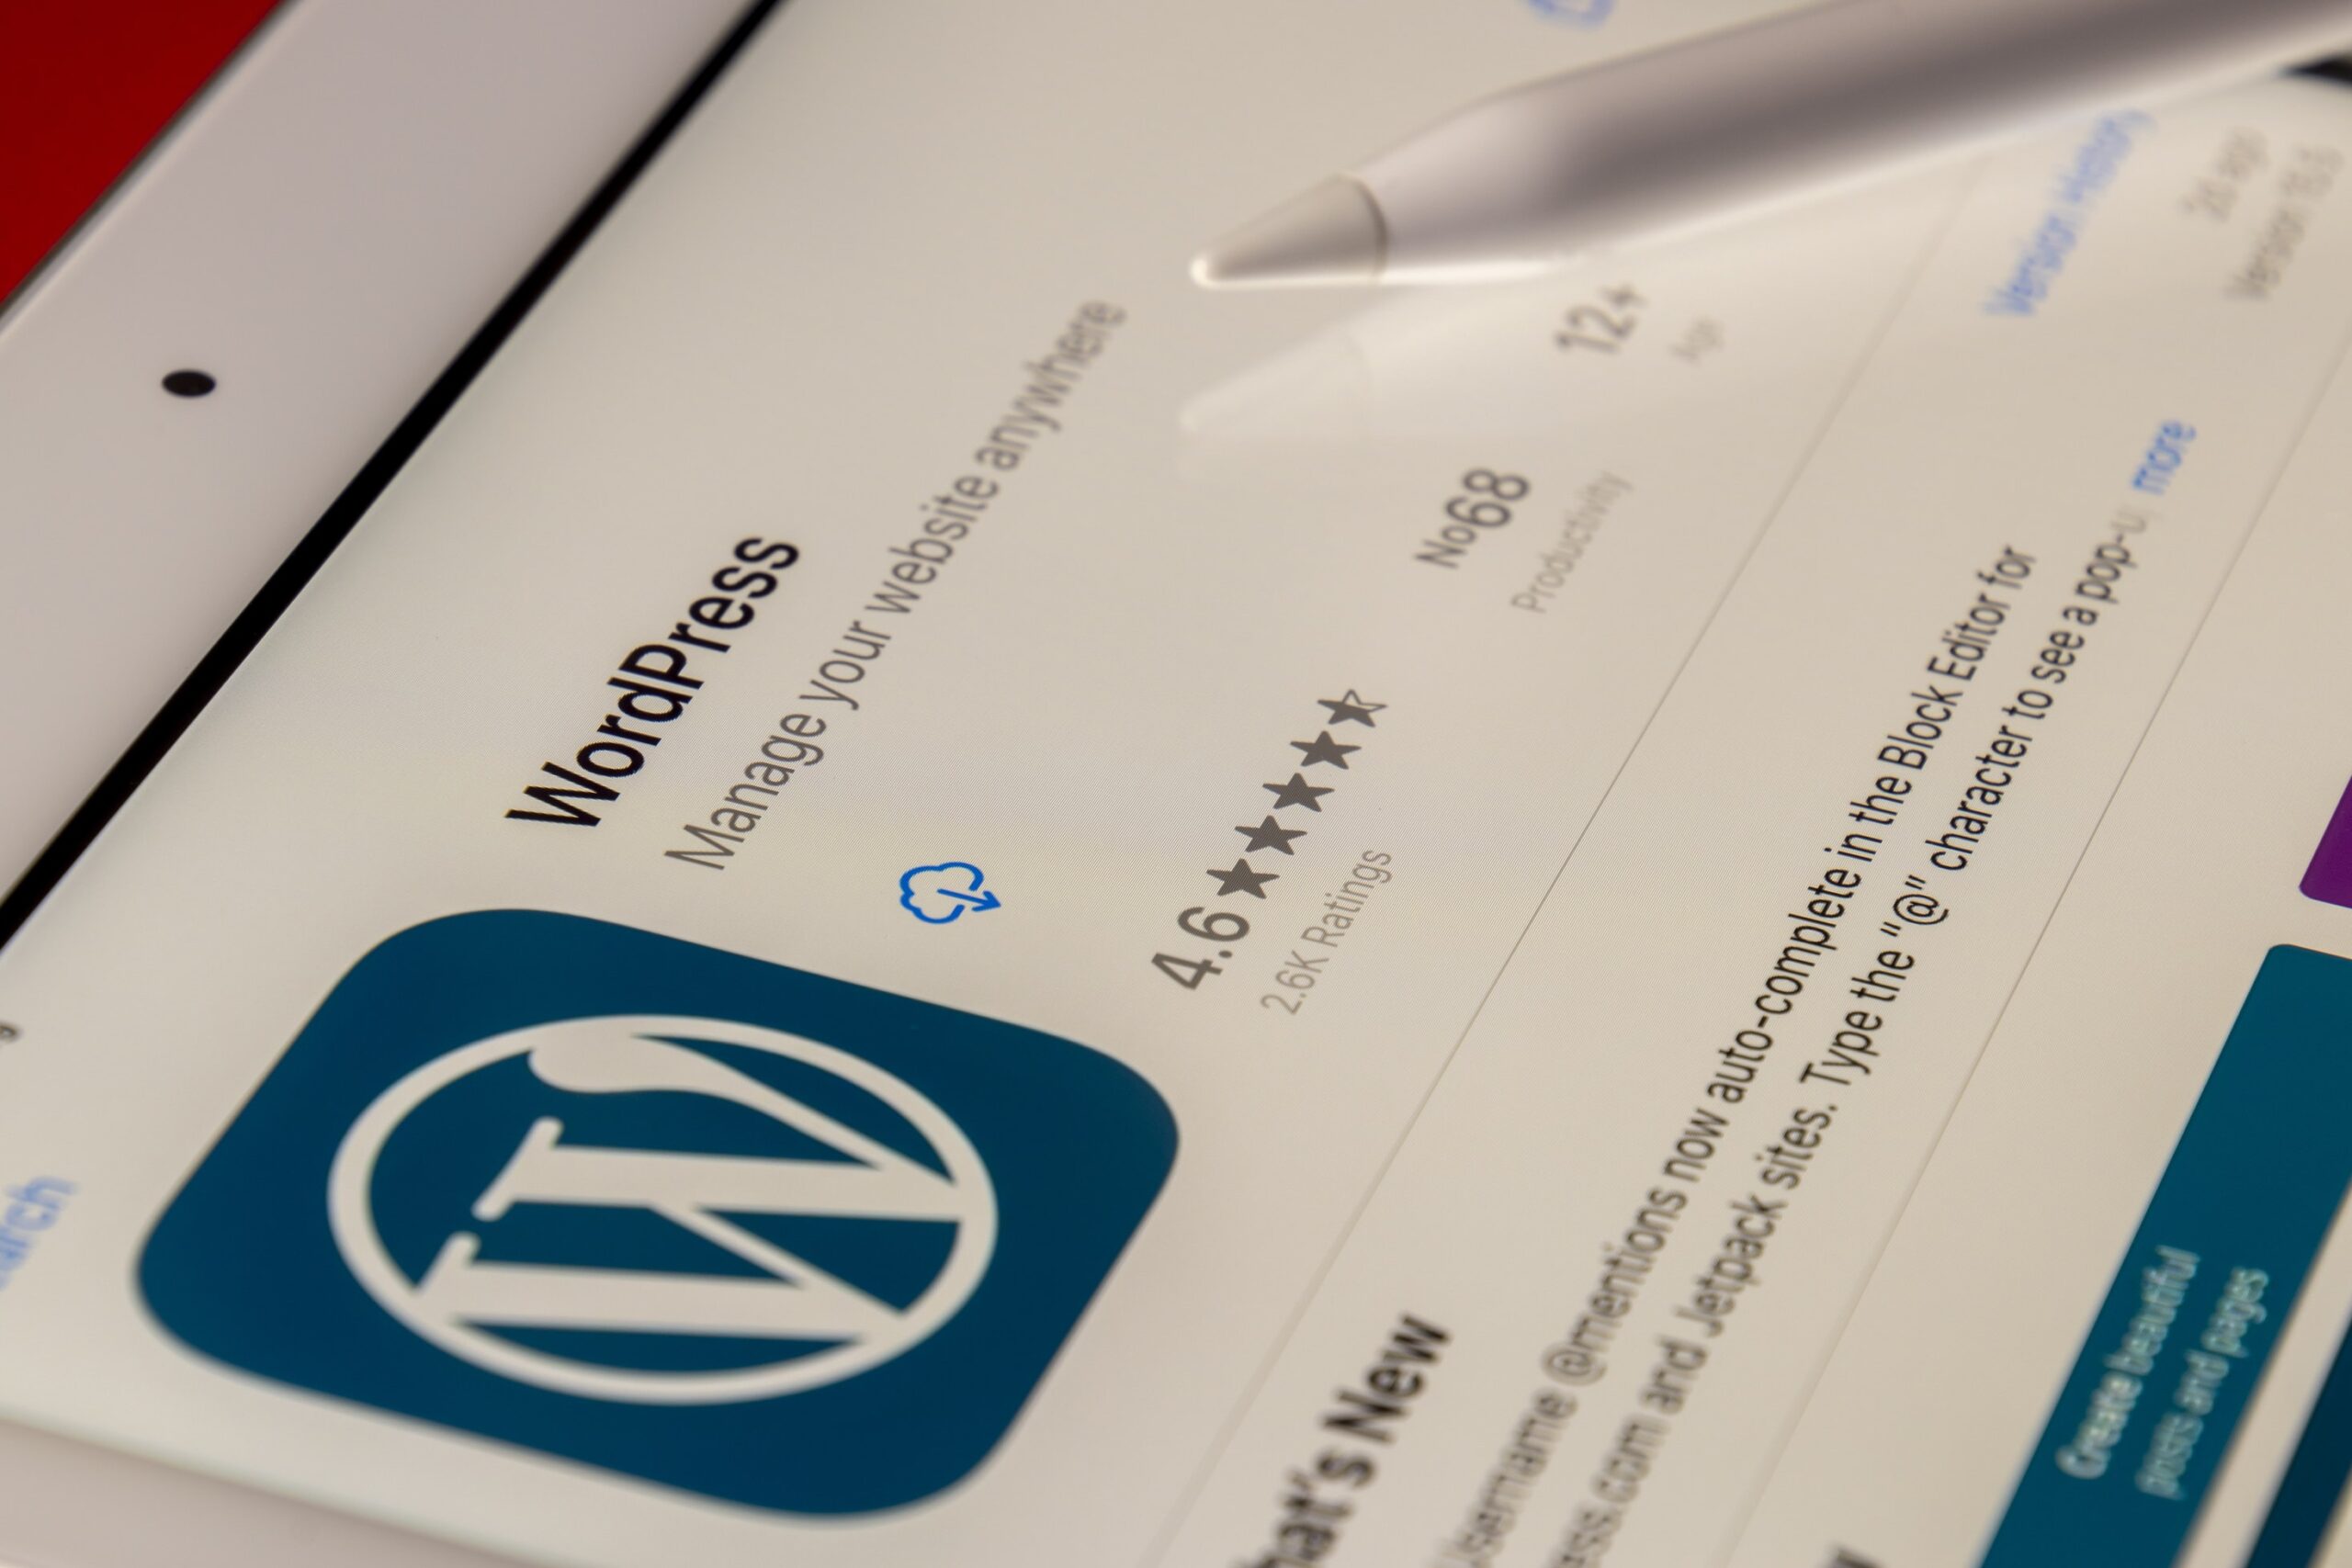 WordPress is so popular due to all the useful plugins it offers - How to Move Your Website to a New Host in 2022 - HostNamaste